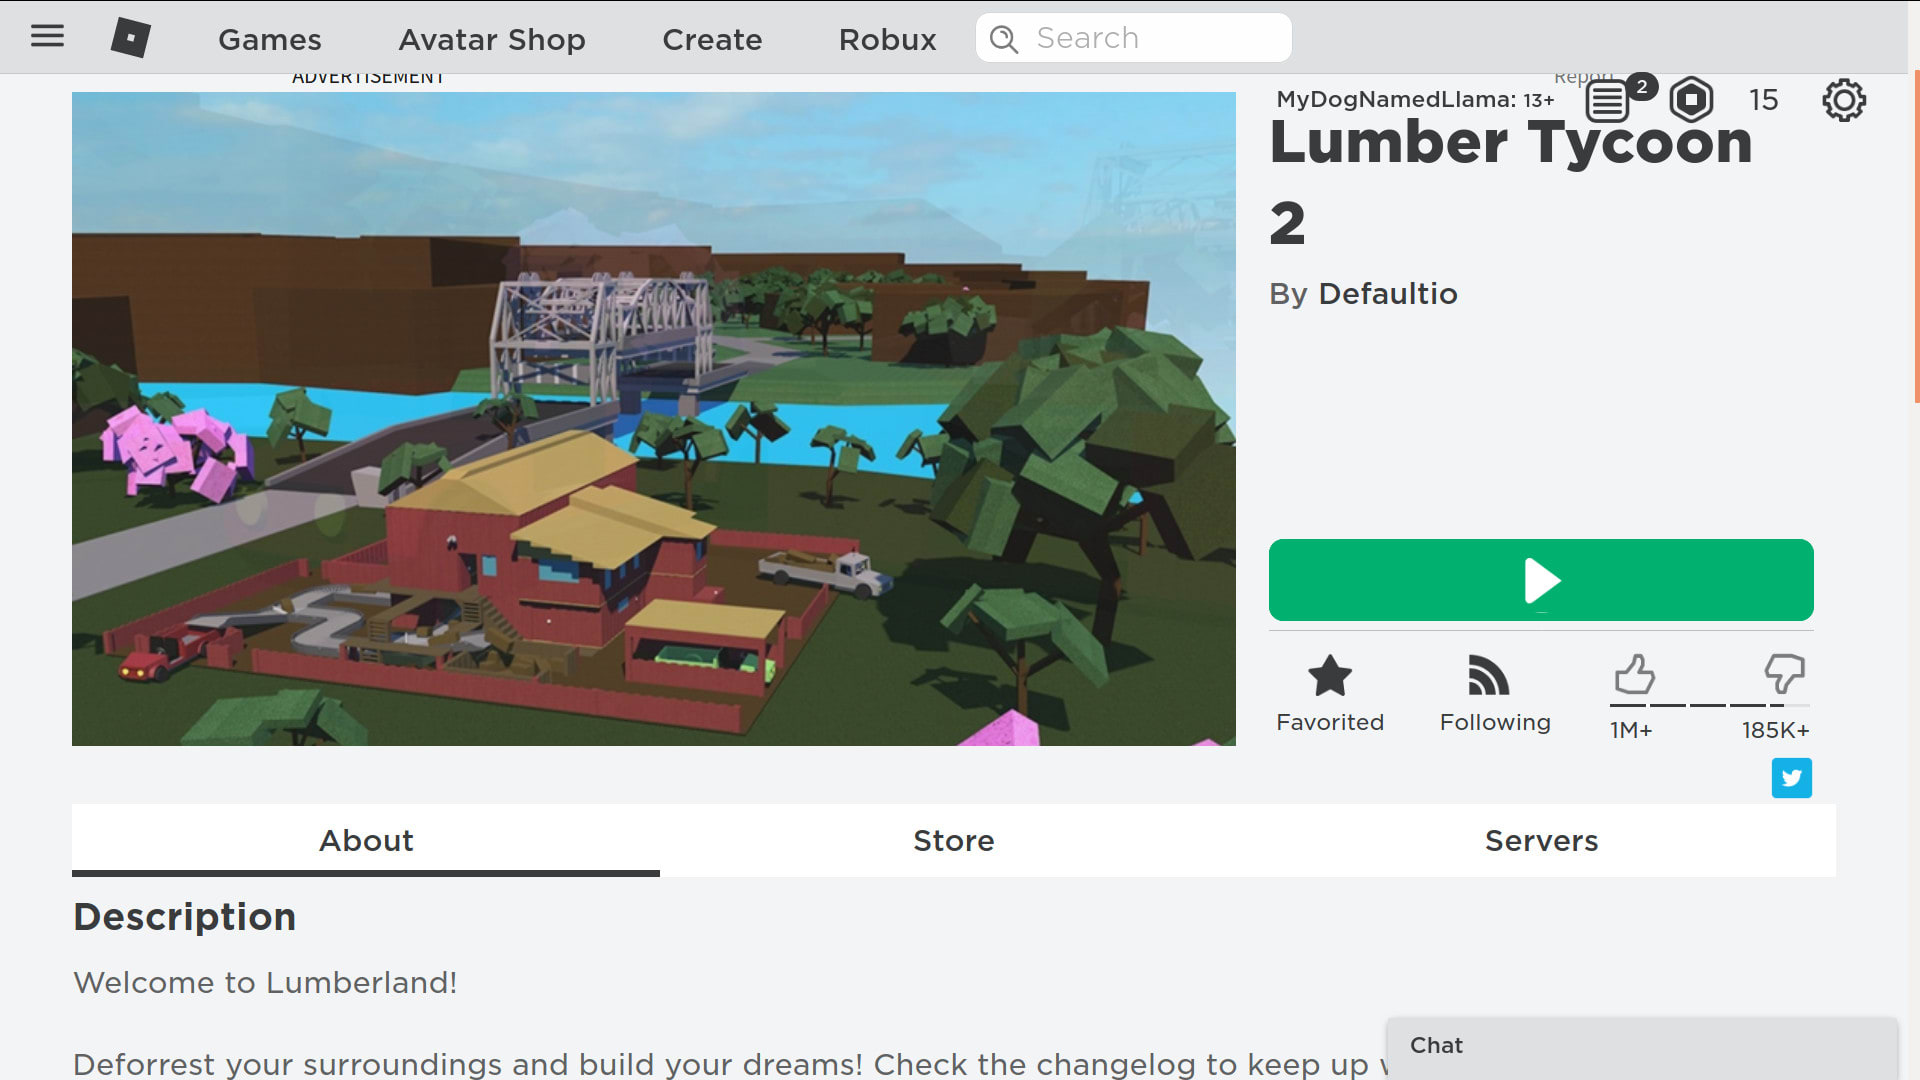 Join Your Roblox Lumbertycoon2 Server And Give You An Alpha Axe By Floofball 142 - roblox axes